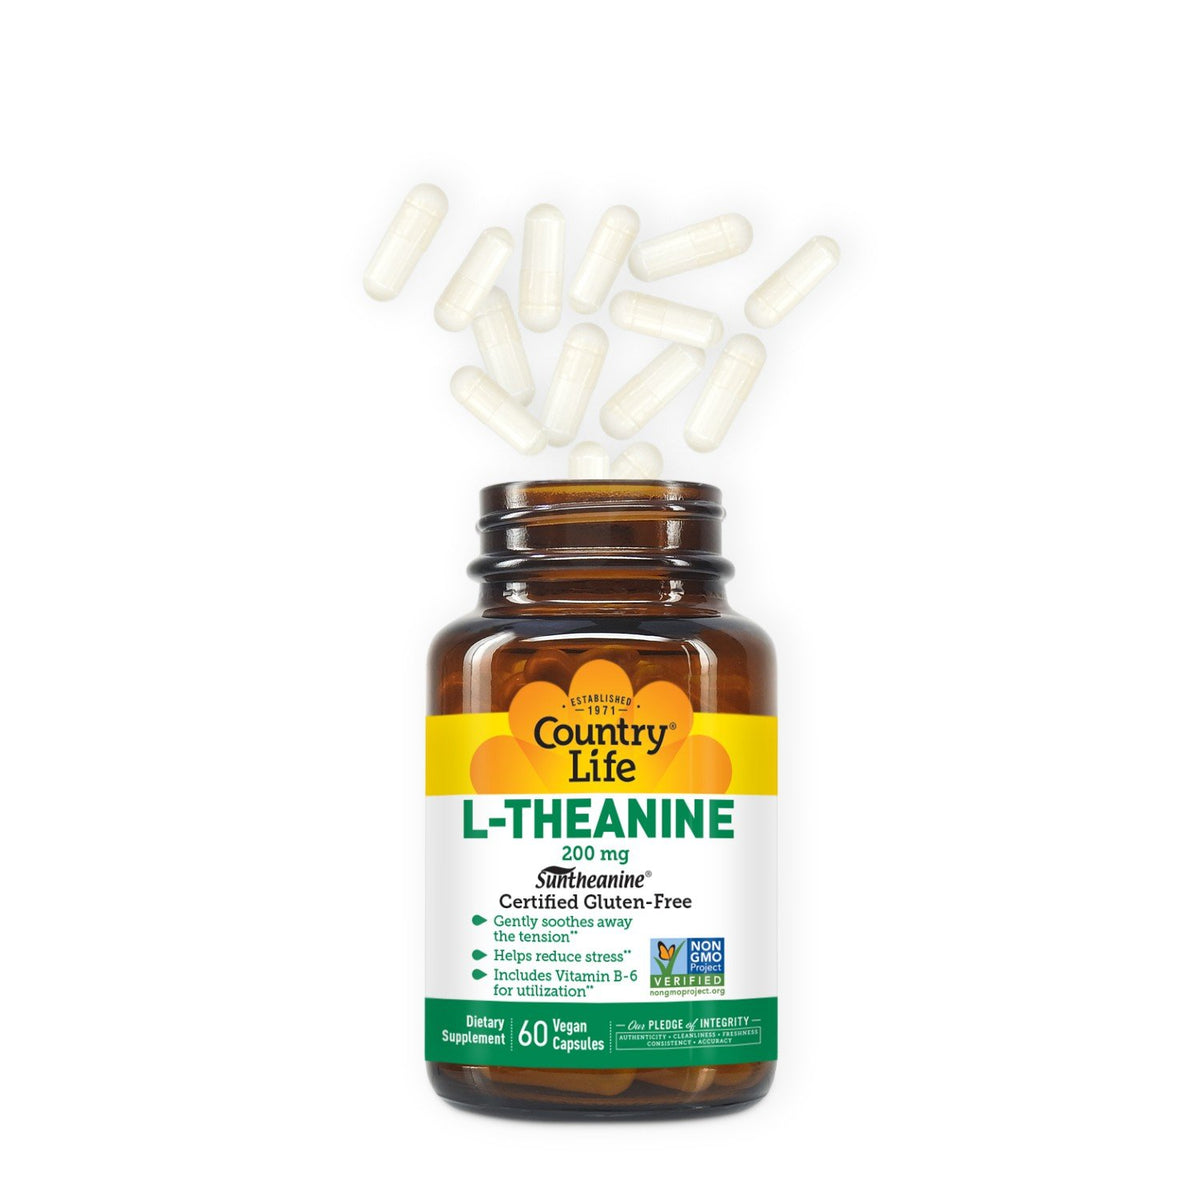 Country Life L-Theanine 200 mg 60 VegCap